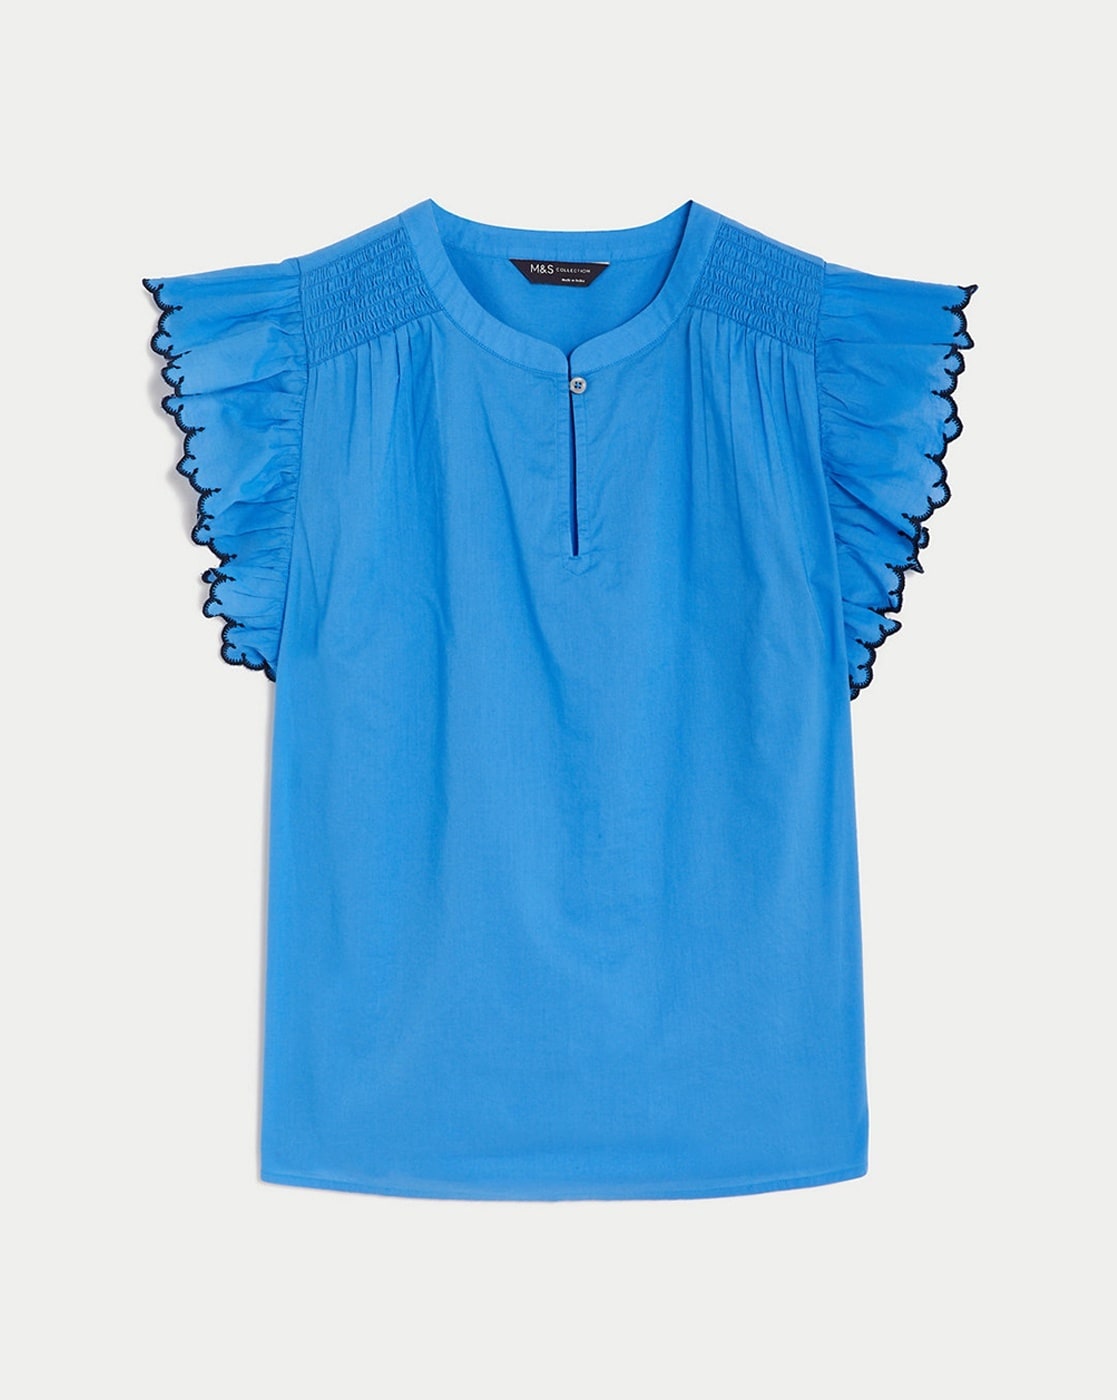 Cobalt blue net blouse with ruffles on sleeves